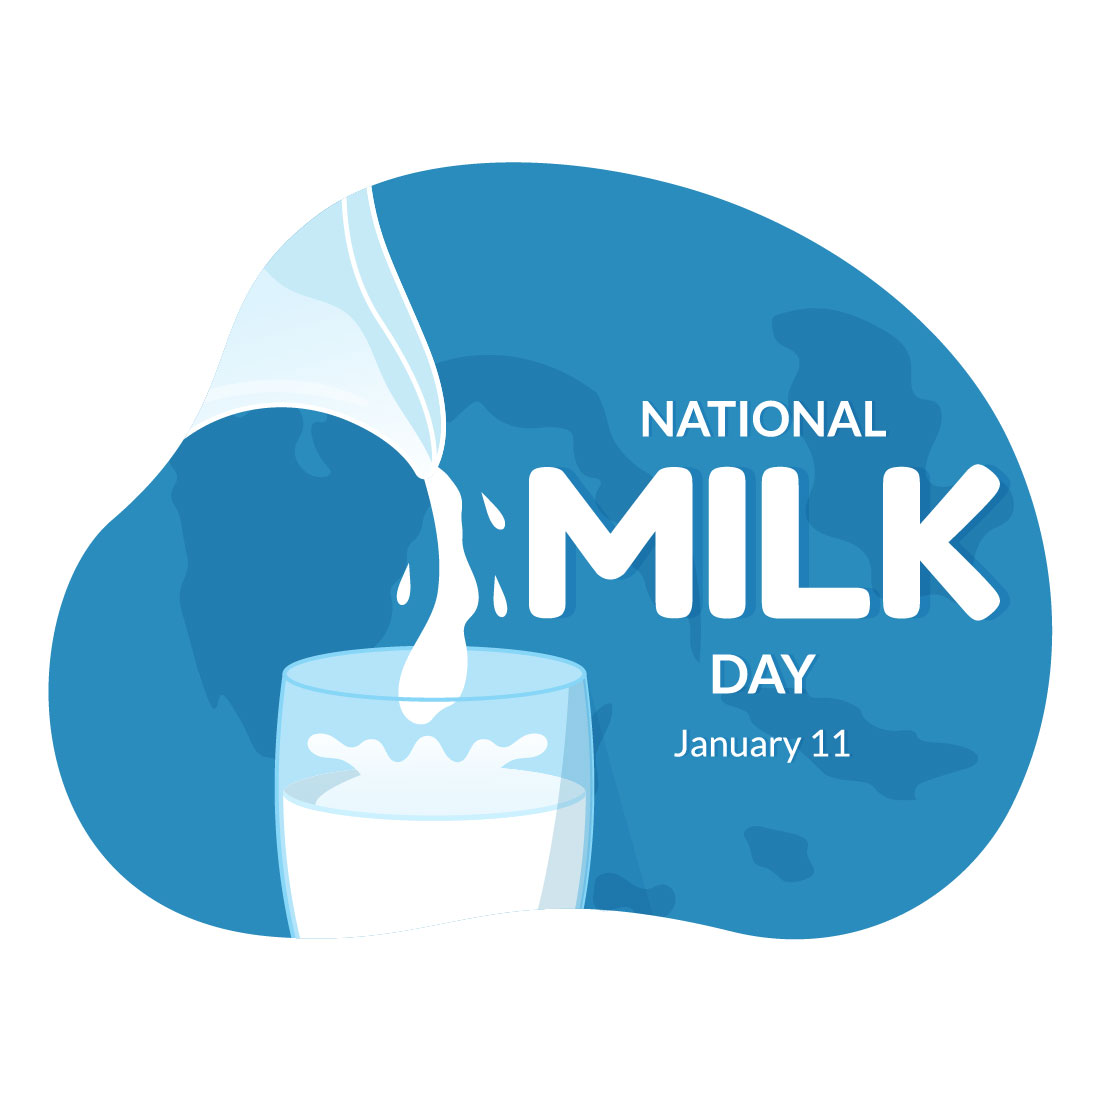 National Milk Day Graphics Illustration cover image.